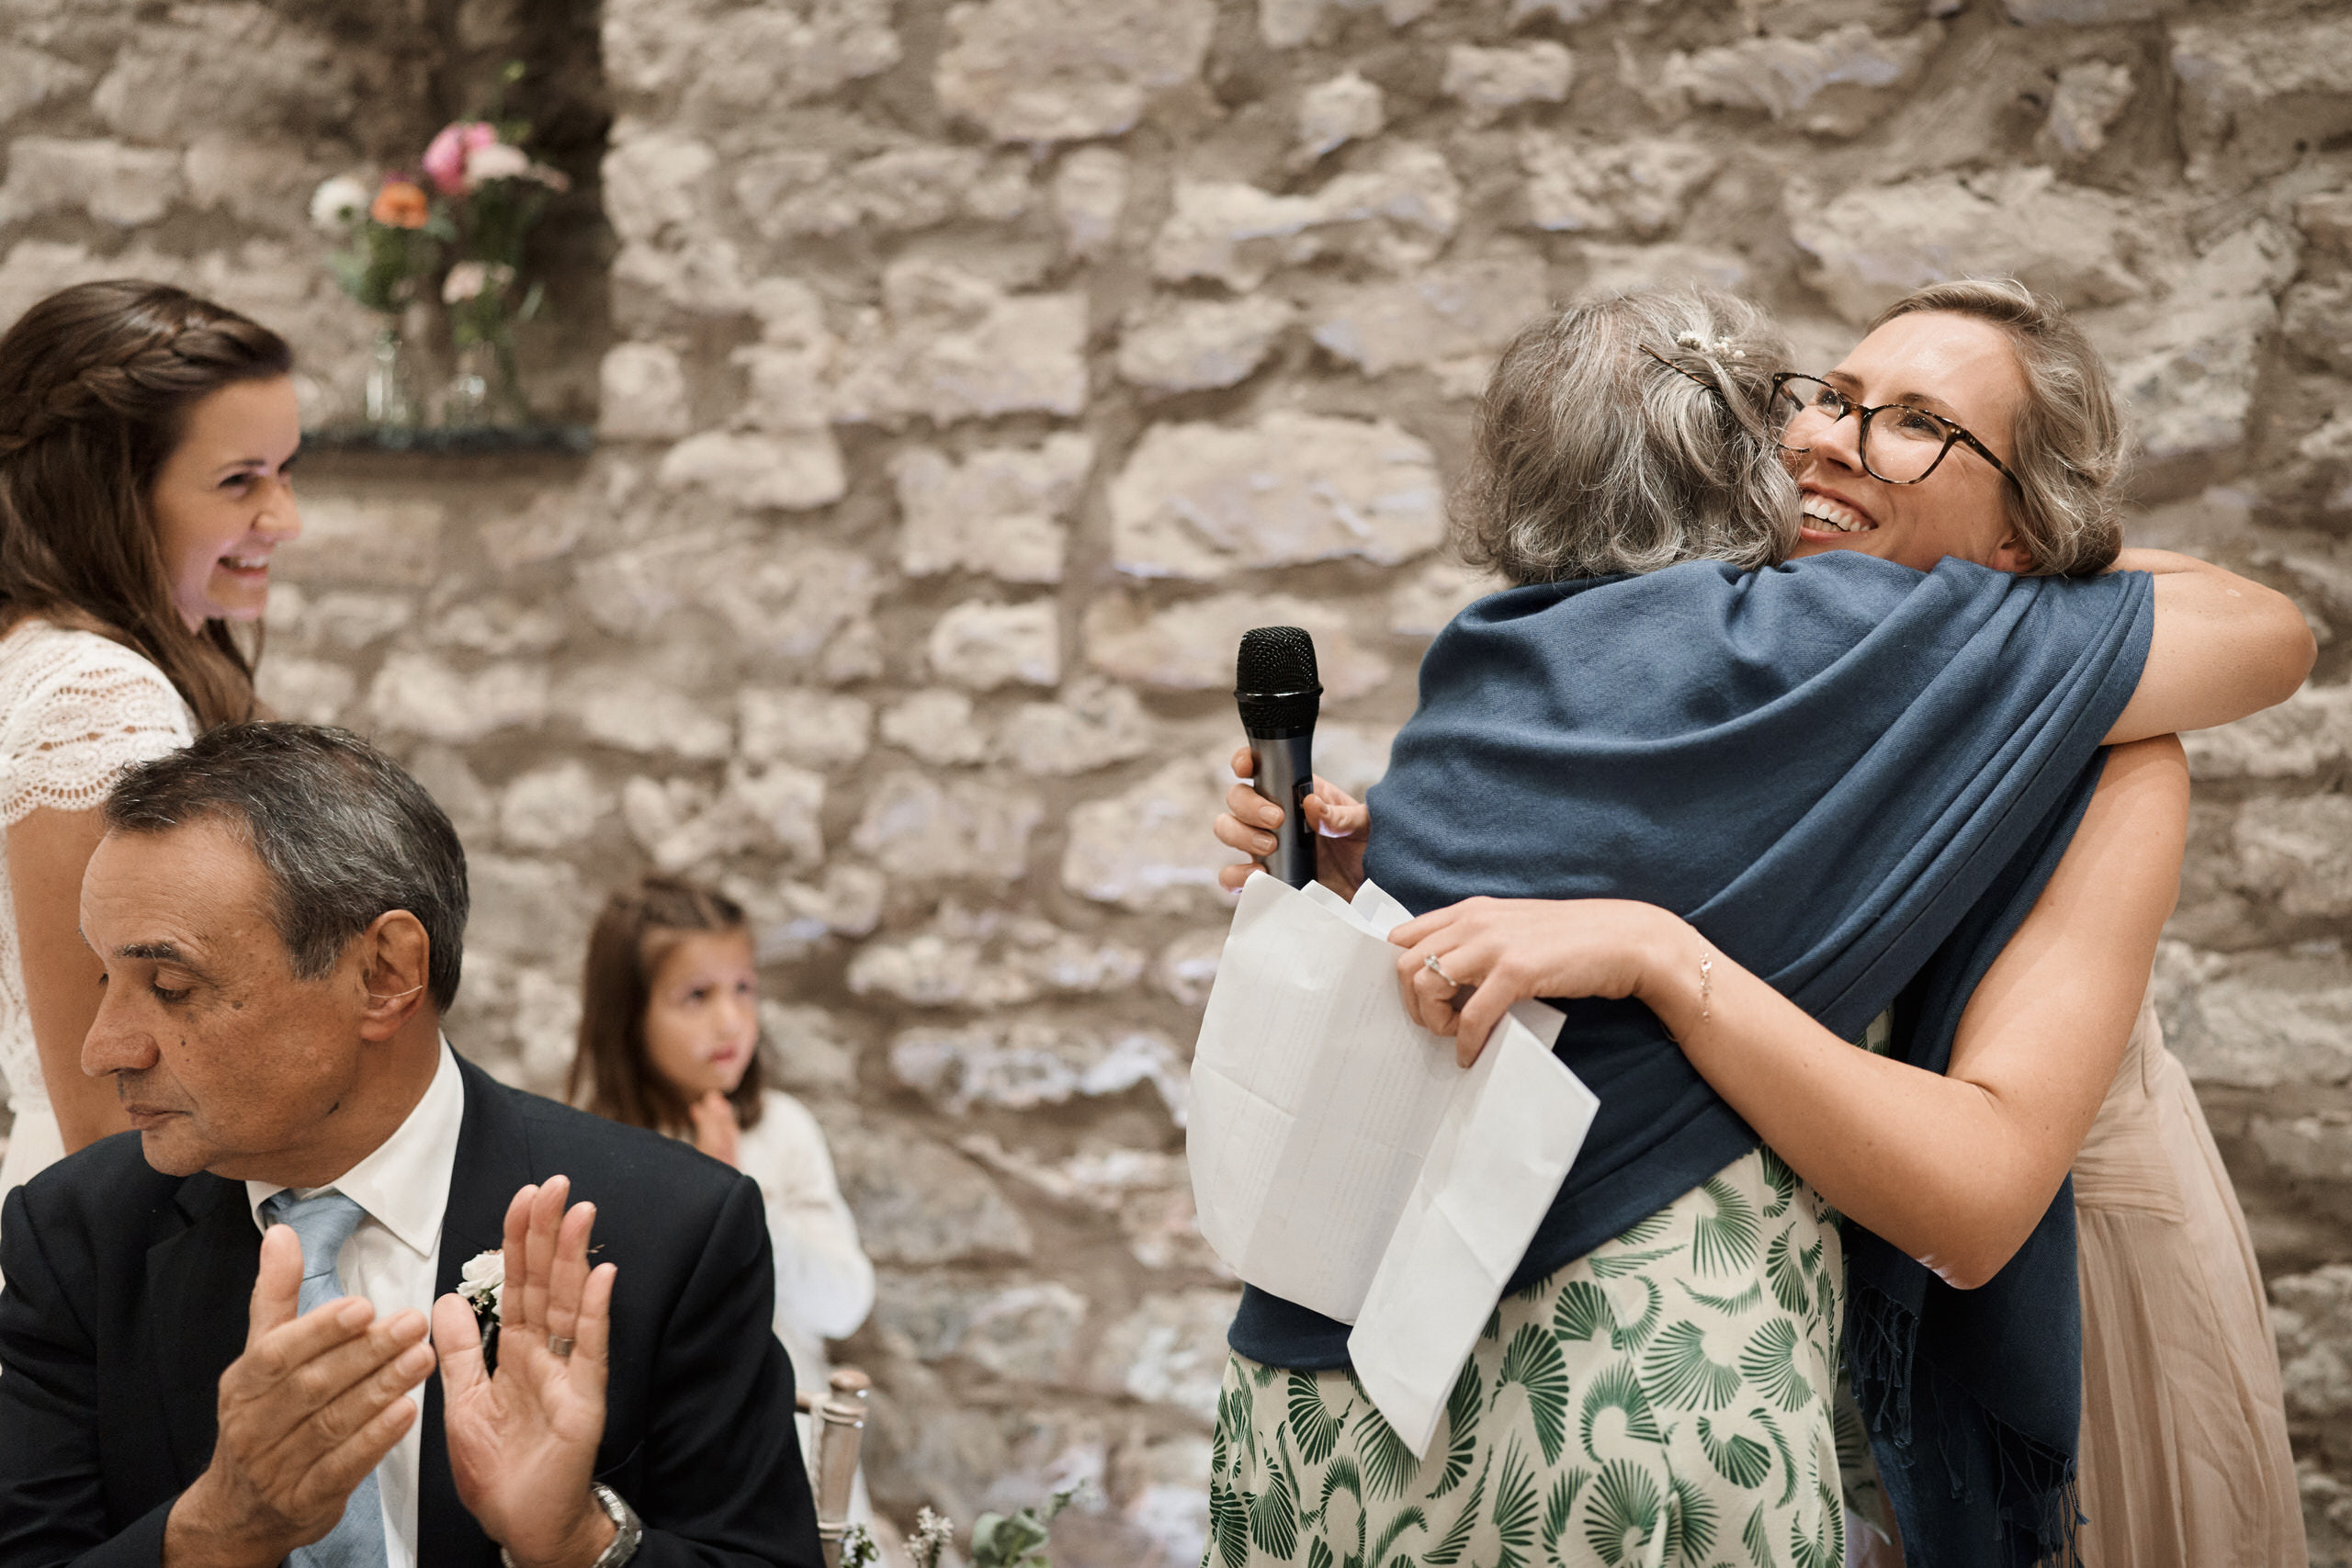 At a wedding, the bride is giving her mom a hug.